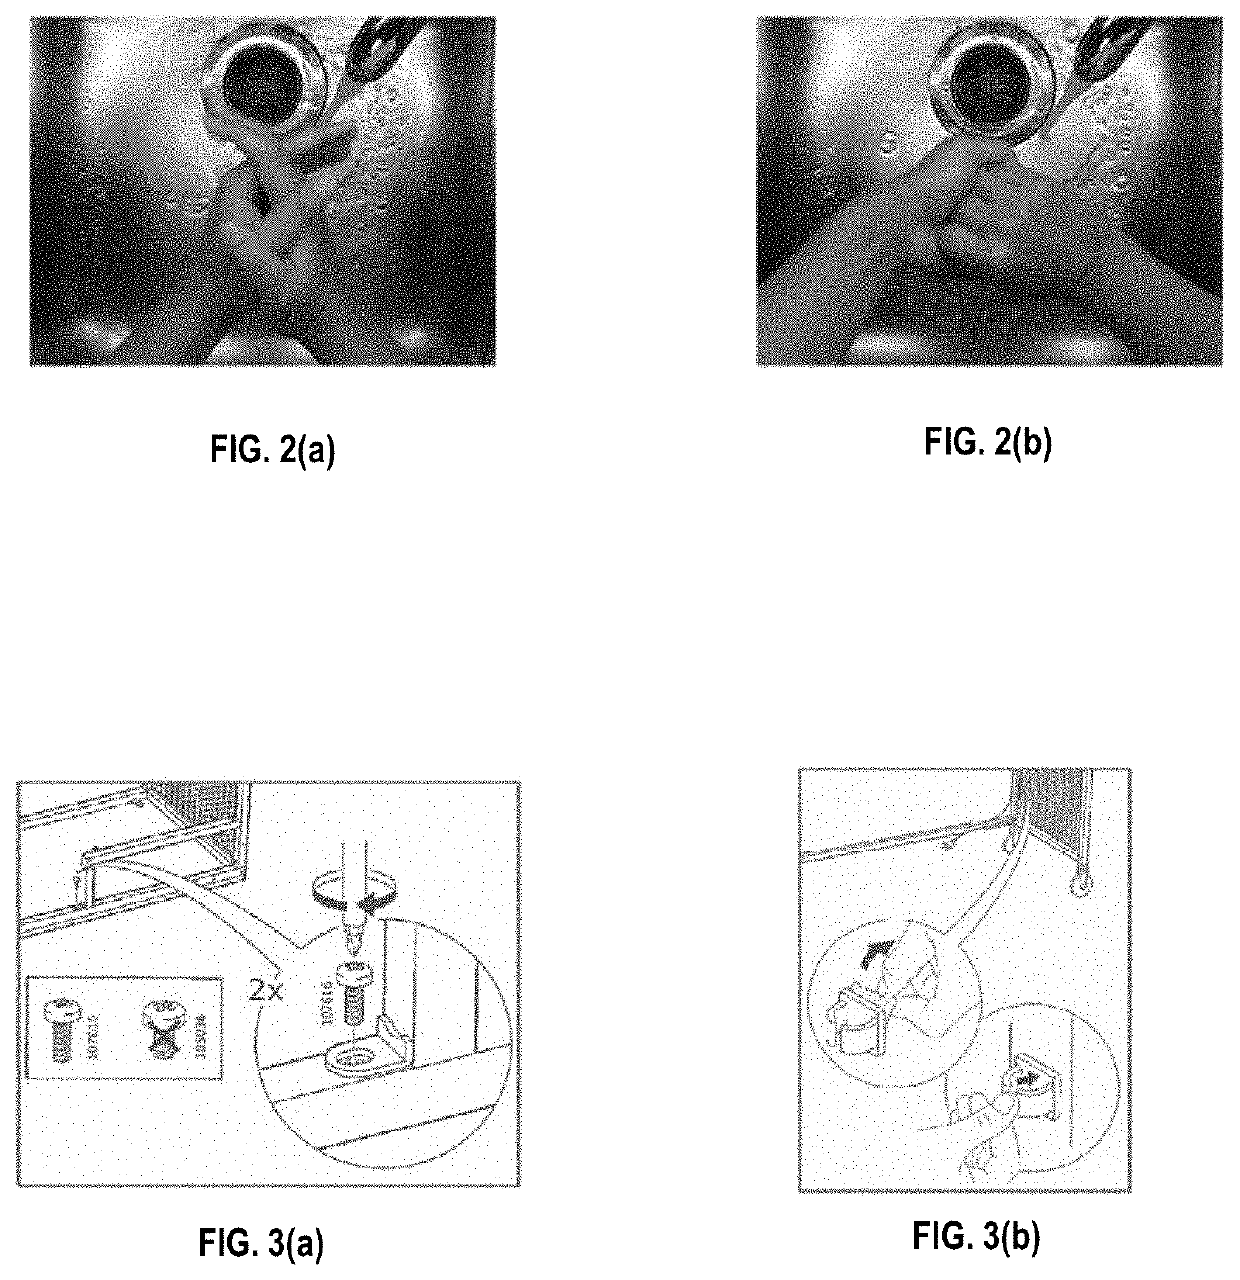 Methods for real-time skill assessment of multi-step tasks performed by hand movements using a video camera